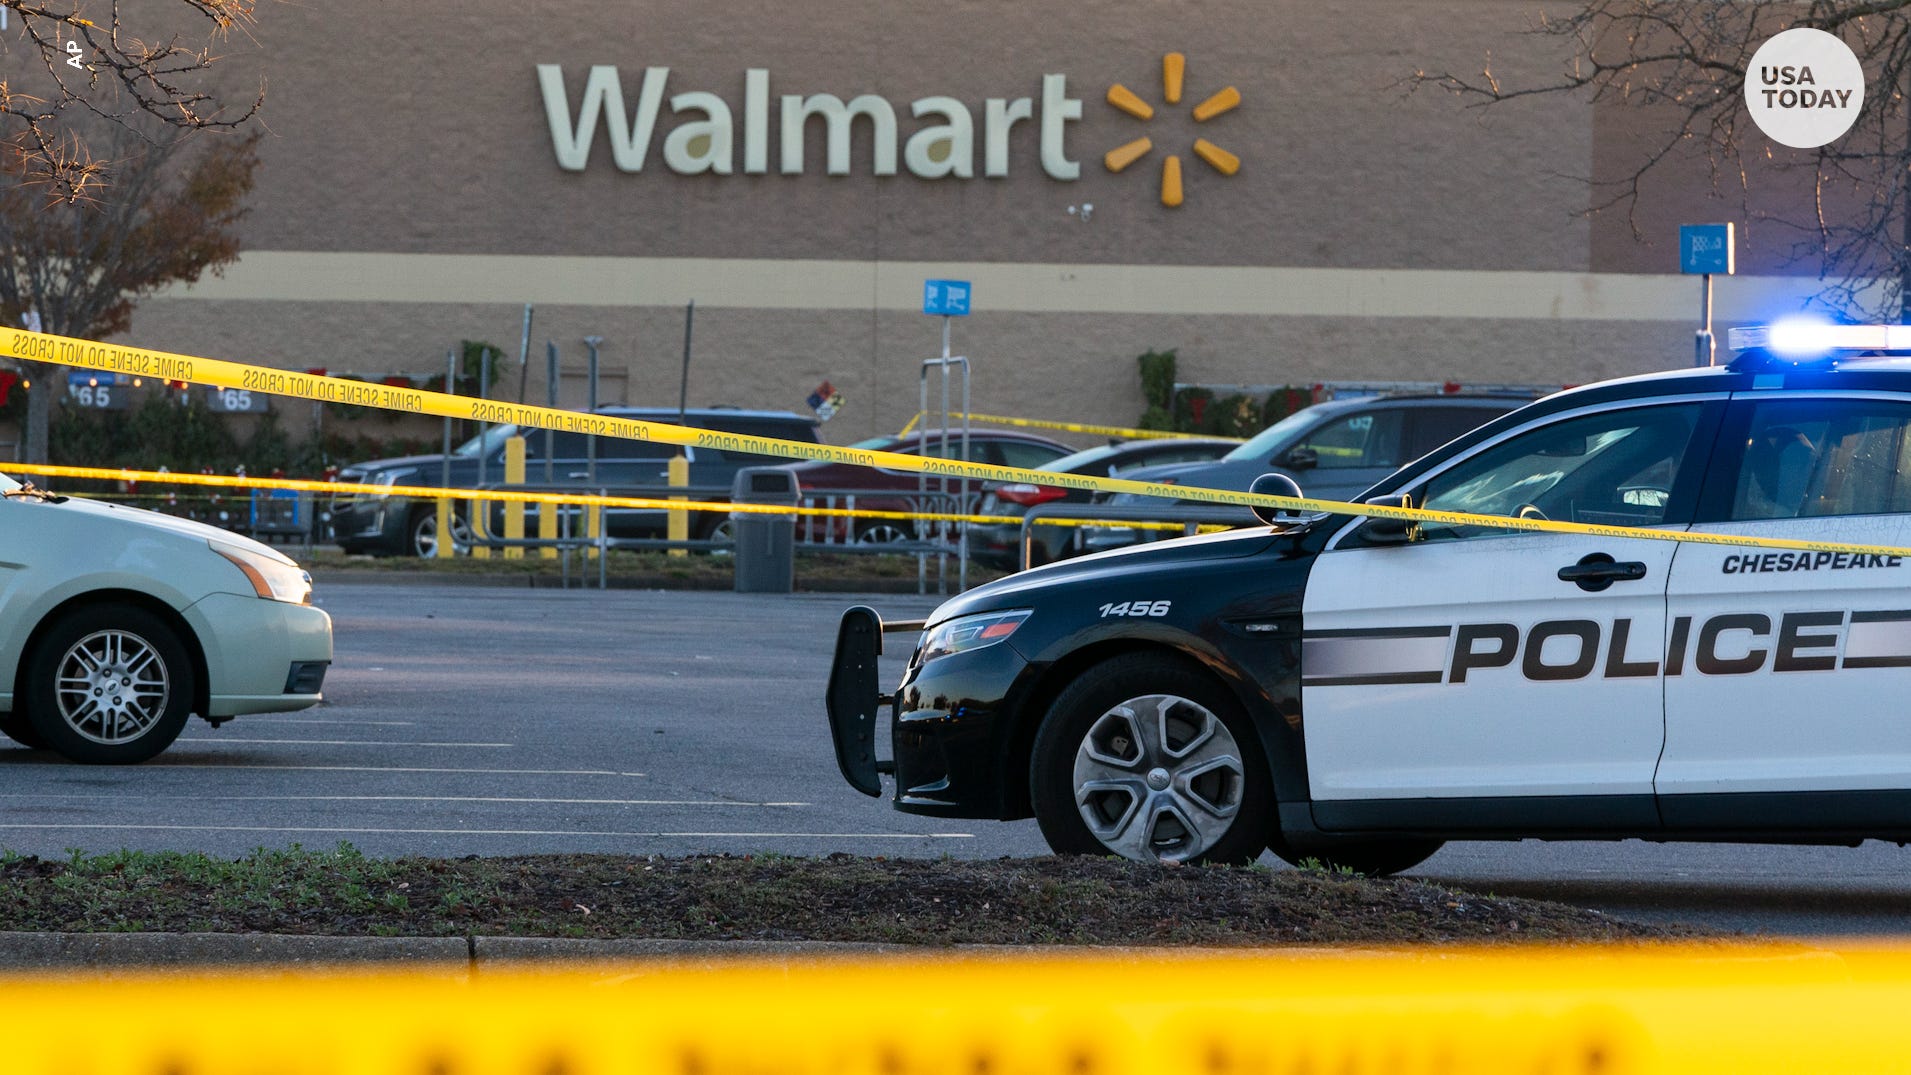  Fact check: False claim of an active shooter at Walmart in Homewood, Illinois 